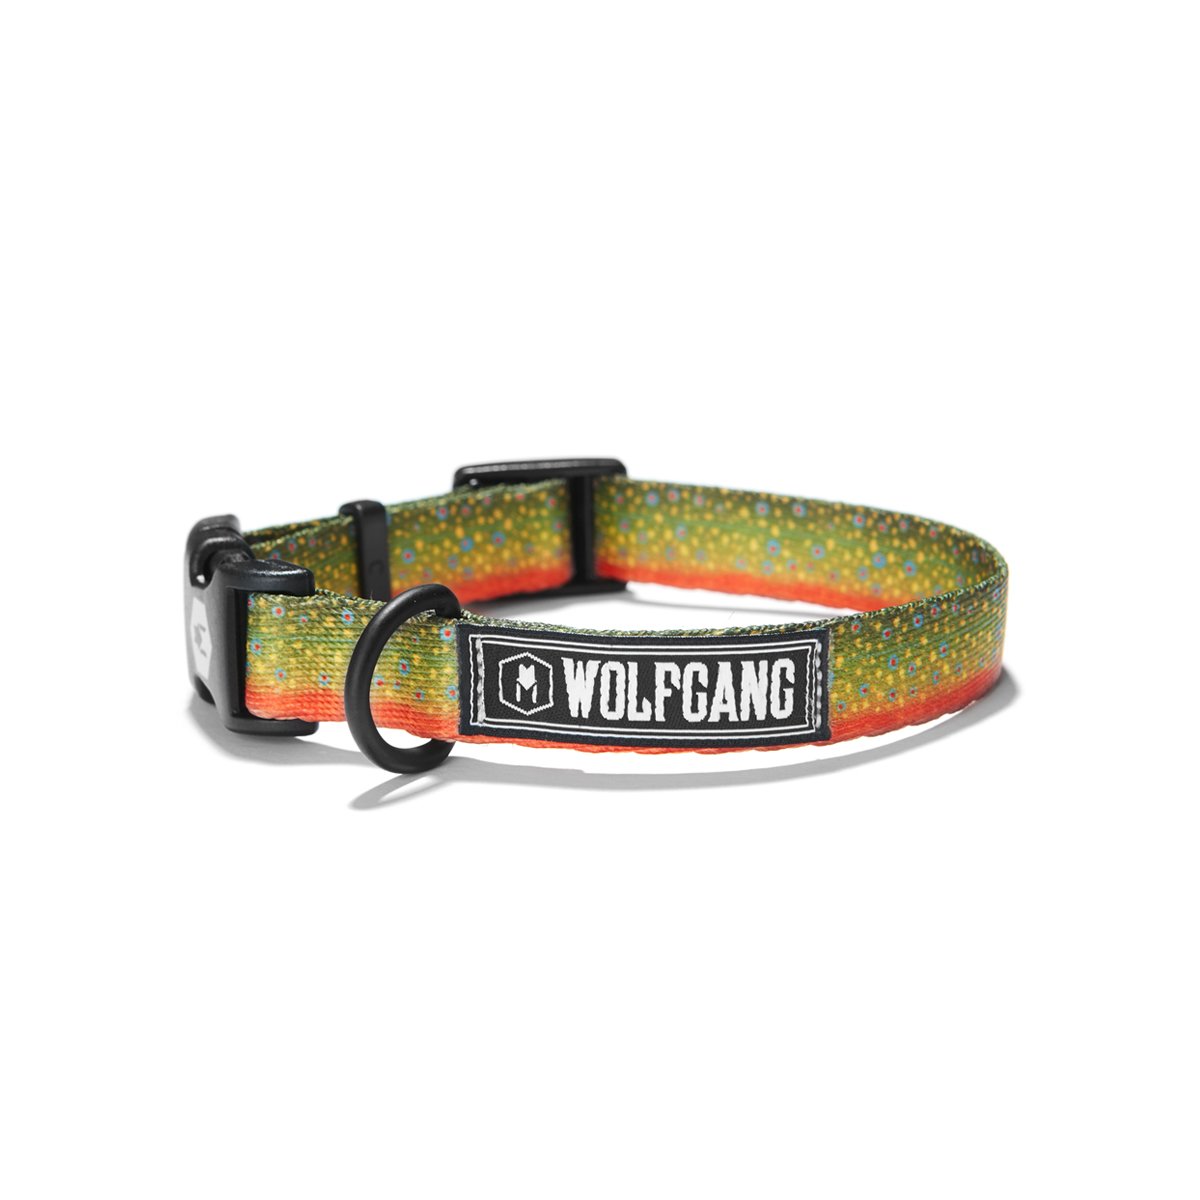 BrookTrout DOG COLLAR Made in the USA by Wolfgang Man & Beast